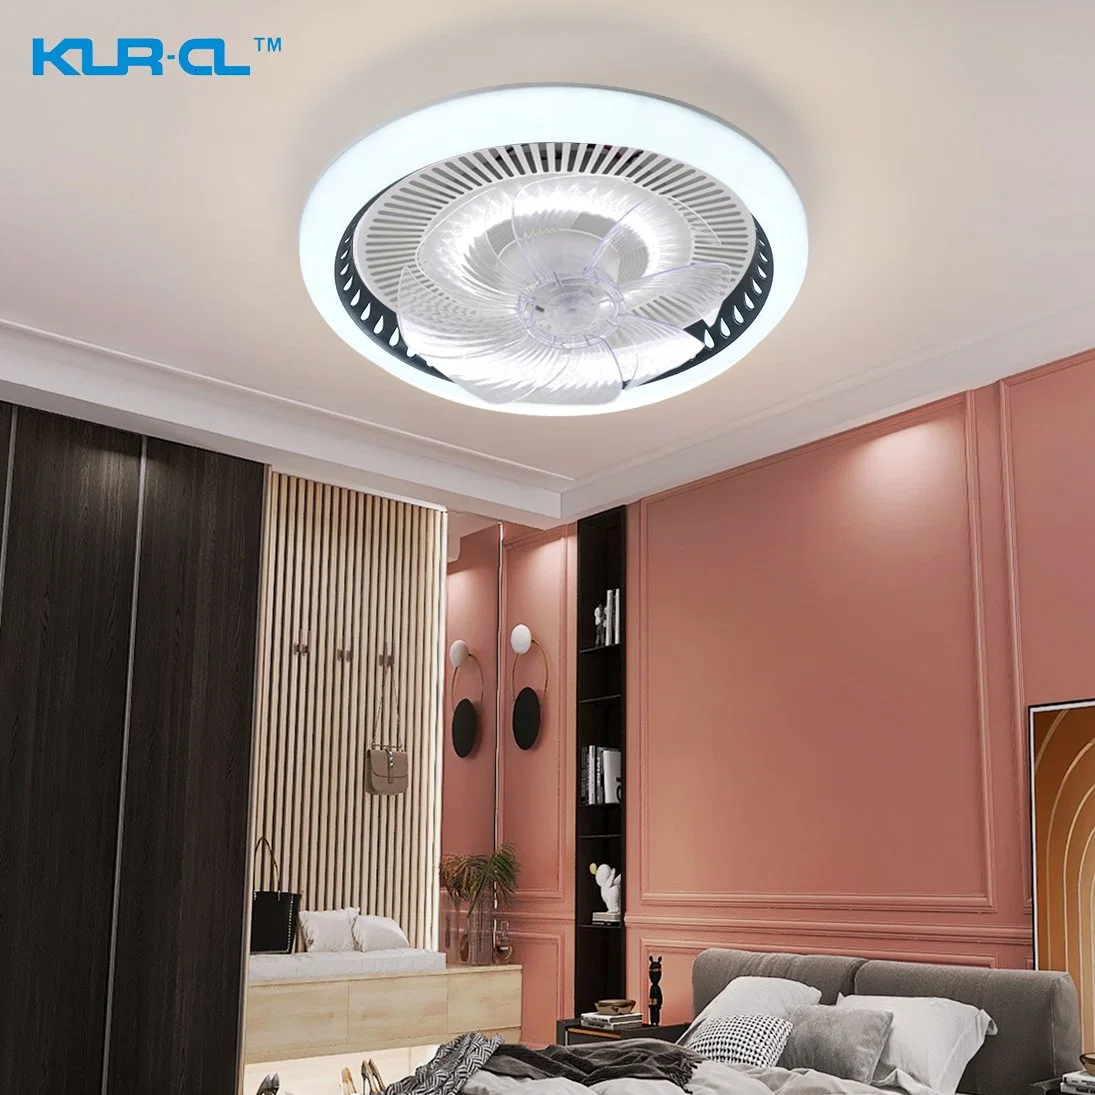 Ambient Lighting Invisible Blade 2.4G Wireless Control LED Interior Lighting Fan